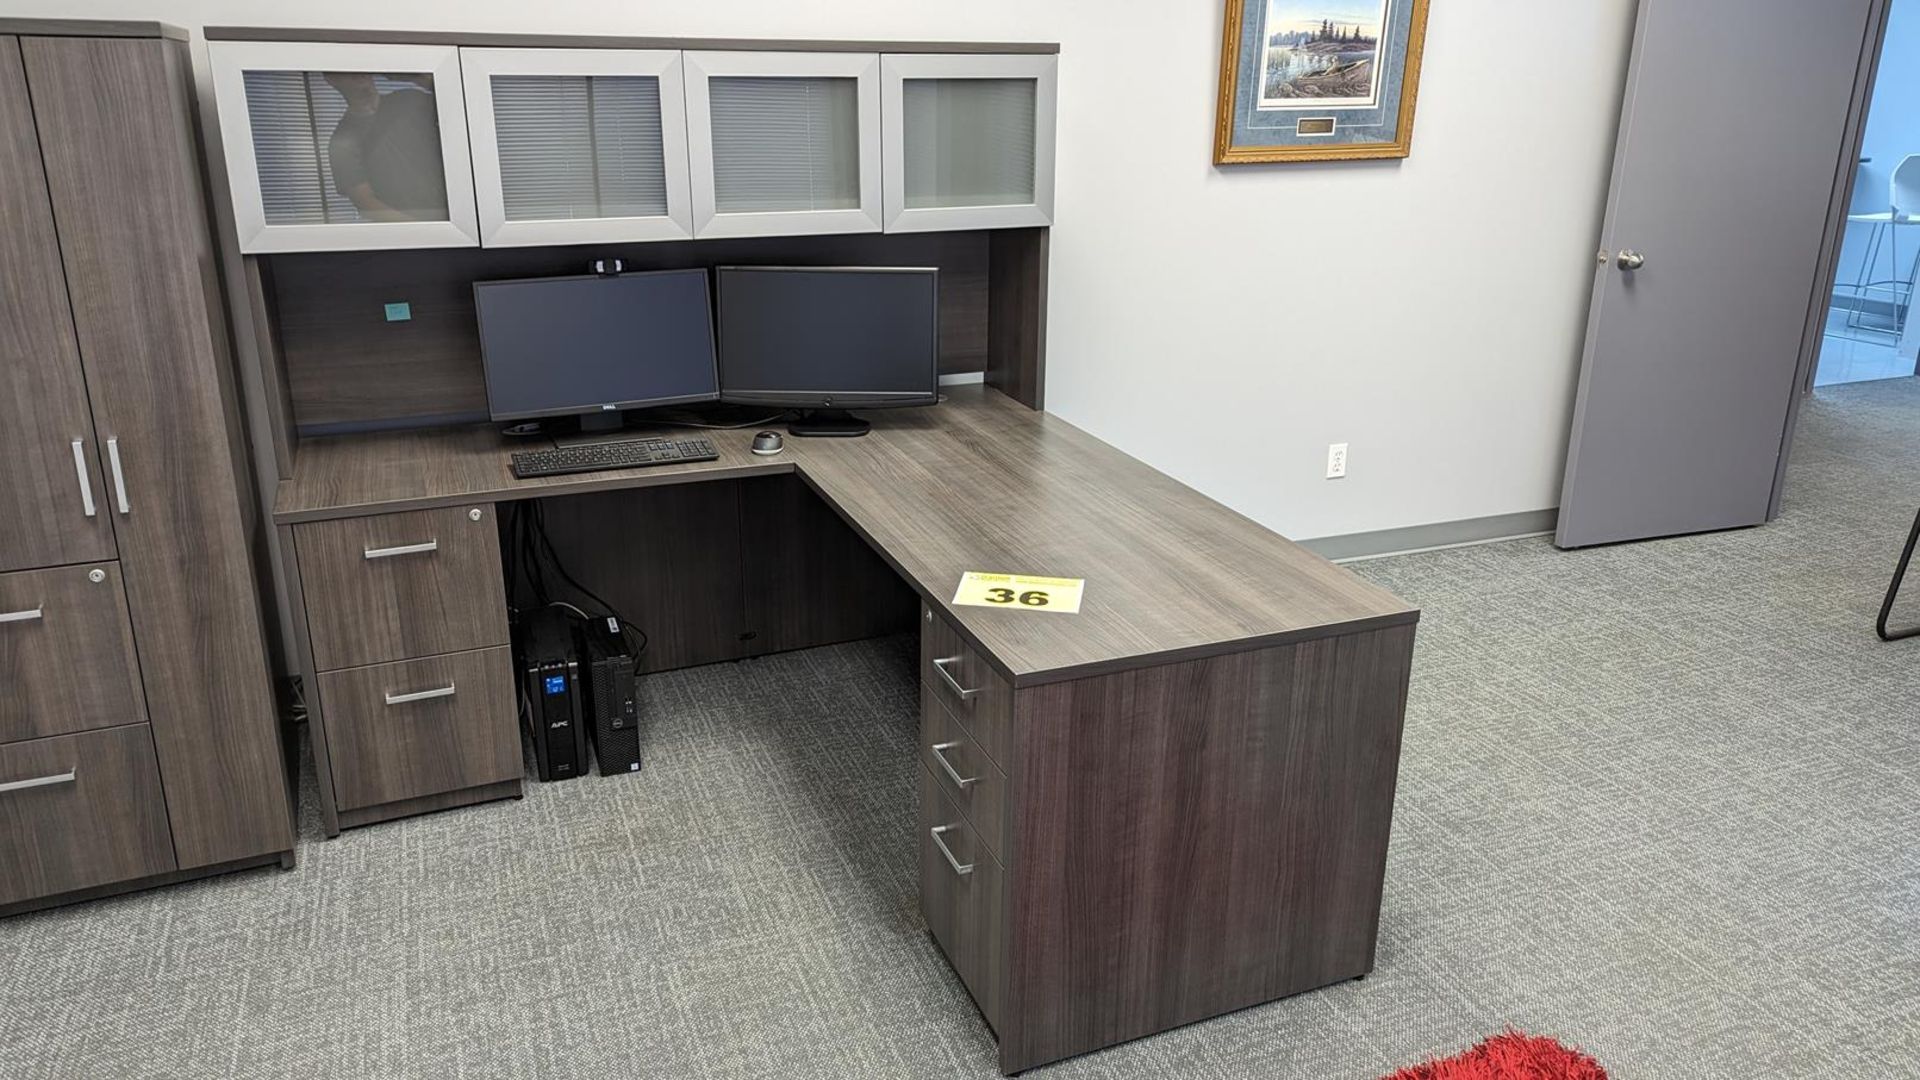 GLOBAL GREY, L SHAPED DESK, & HUTCH, (FURNITURE ONLY) (STORAGE CABINET IS LOT 40), DIMENSIONS 6' X - Image 2 of 2